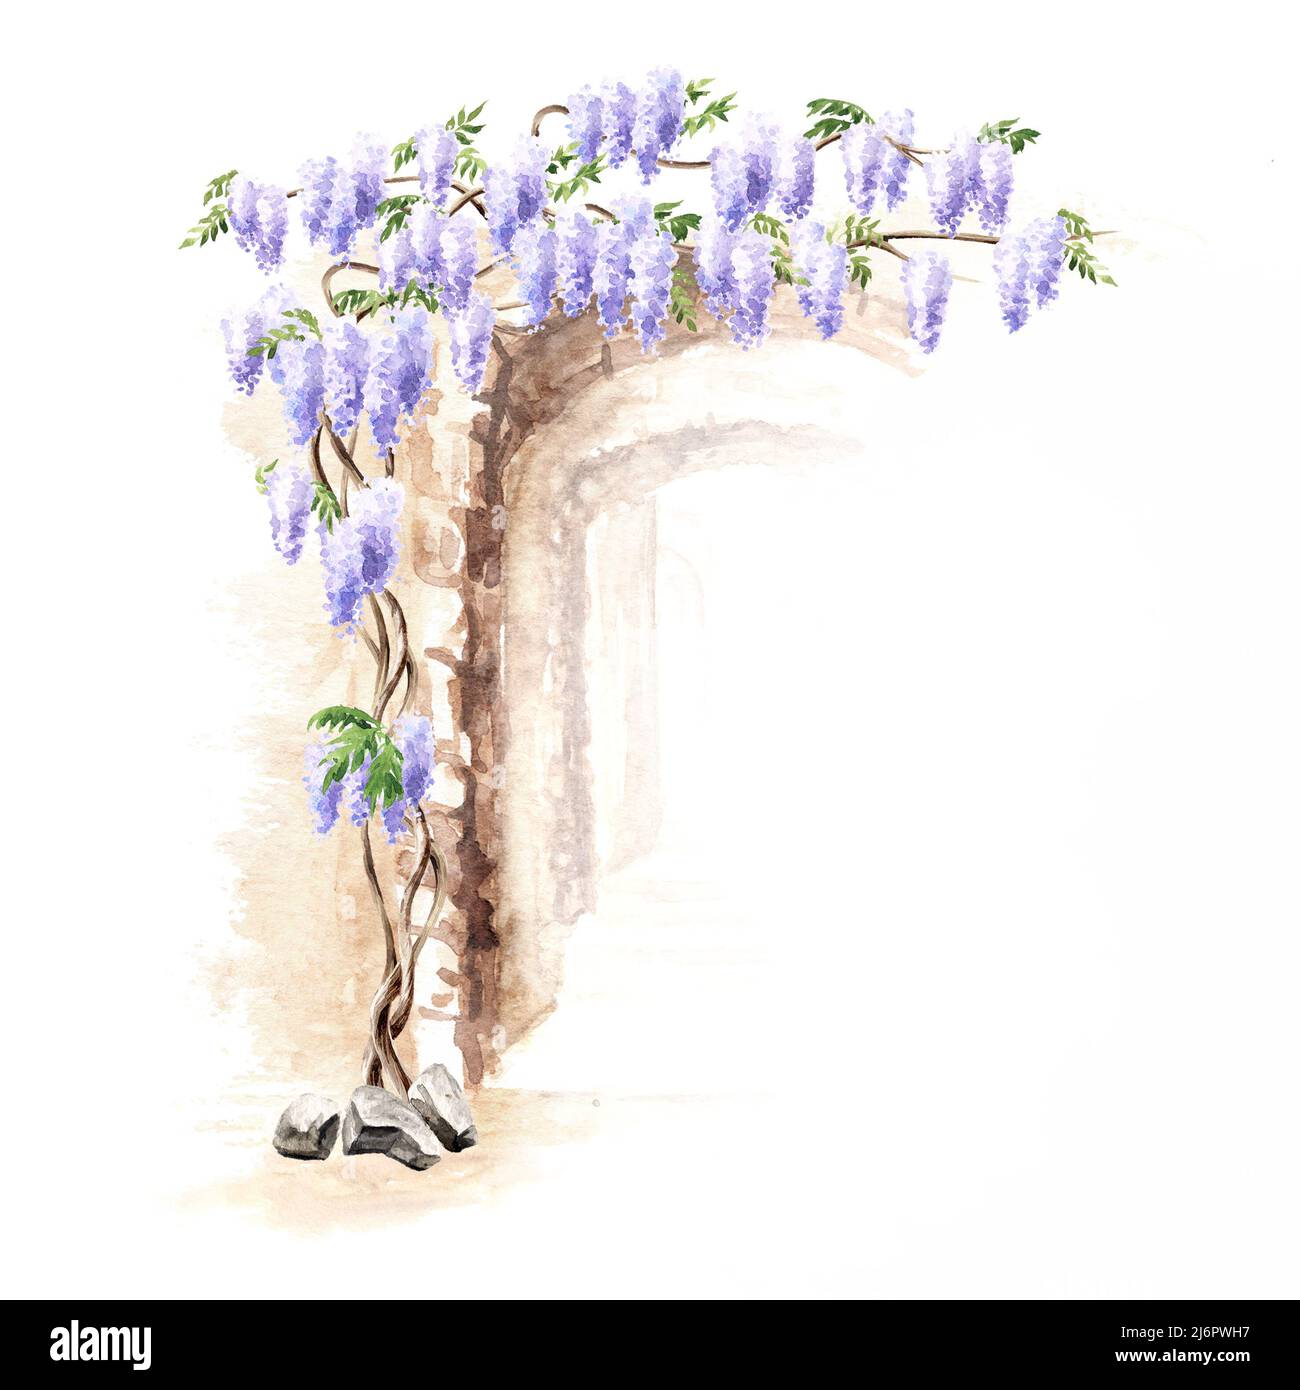 Old architecture arck and  Wisteria  blossom tree. Hand  drawn watercolor  illustration isolated on white background Stock Photo